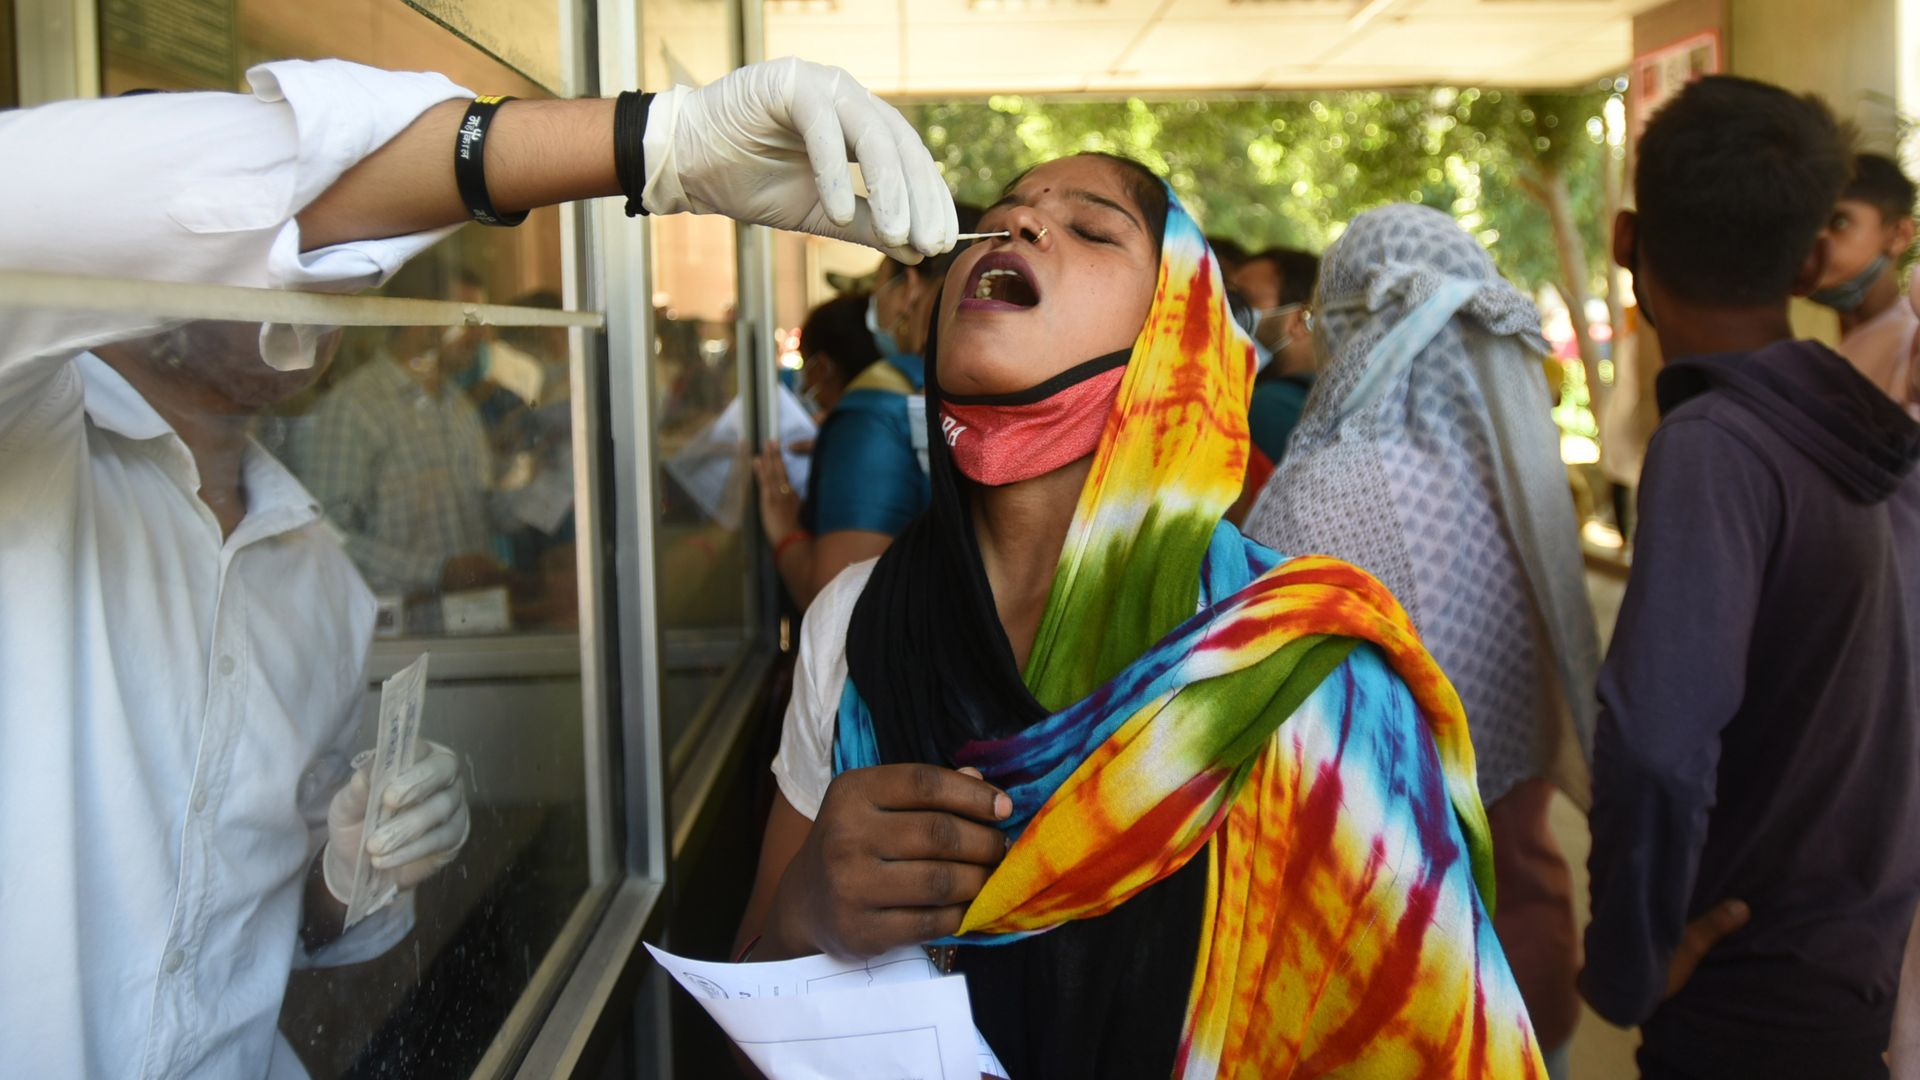 A health care worker administering a coronavirus test in Noida, India, on Oct. 4.